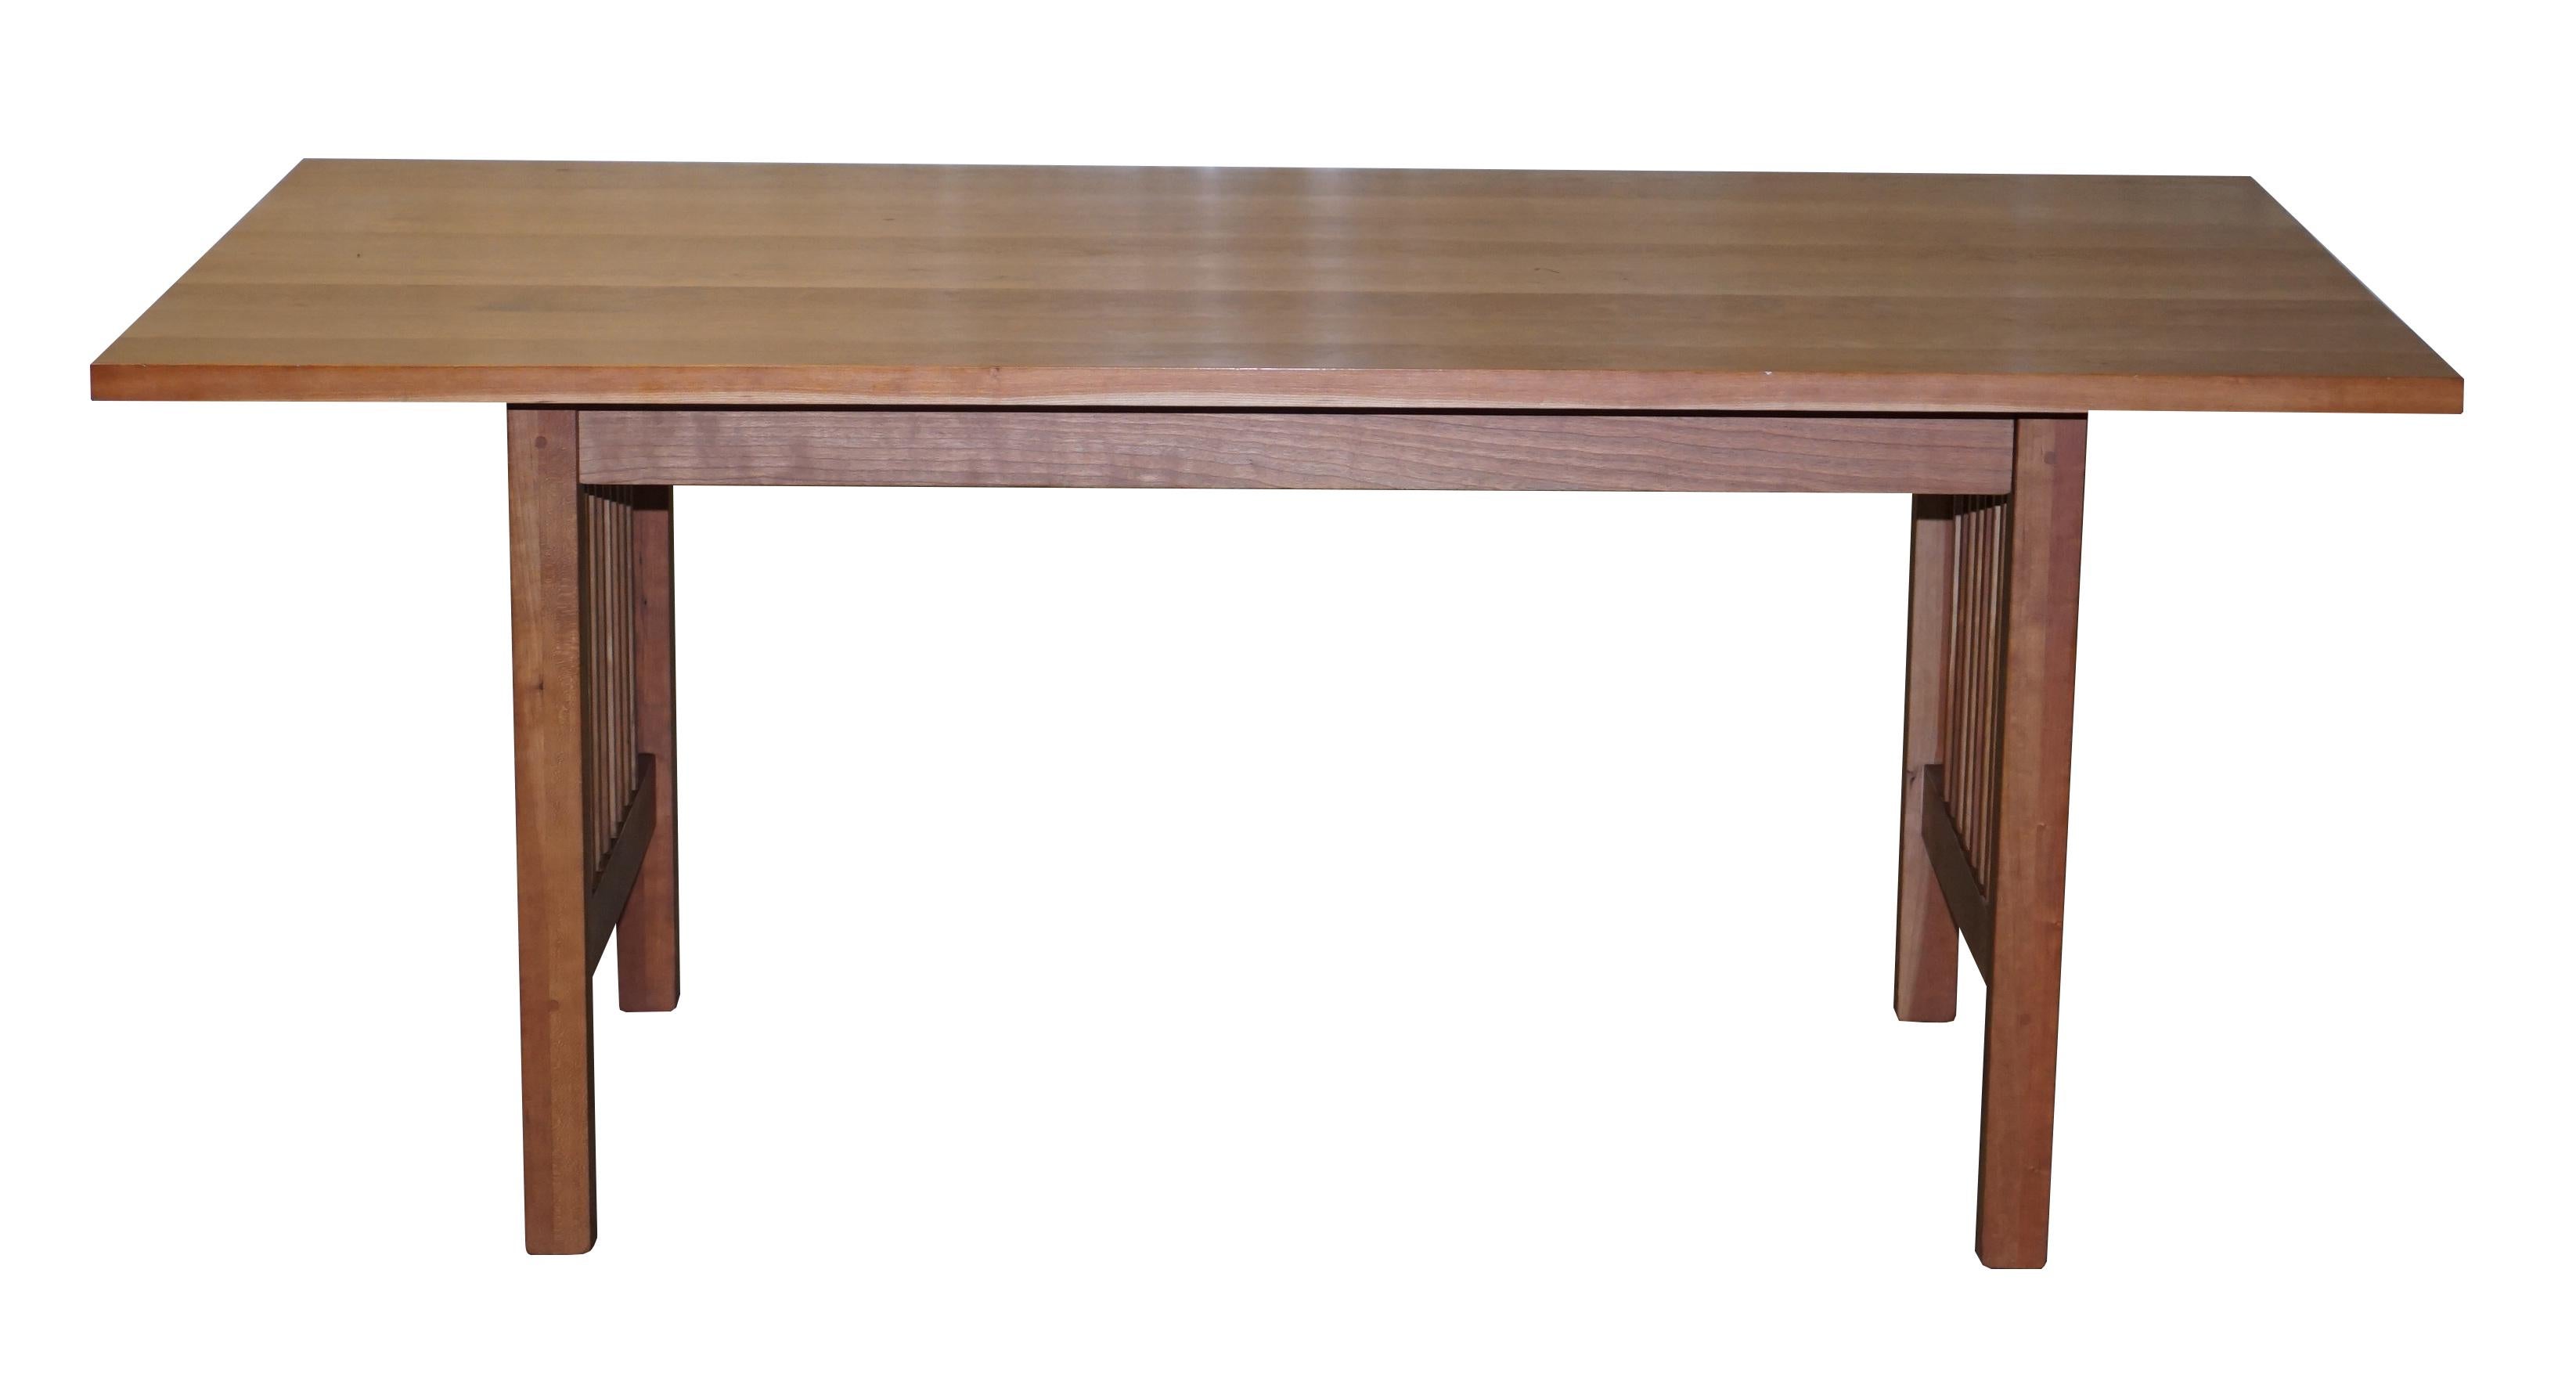 Wimbledon-Furniture

Wimbledon-Furniture is delighted to offer for sale this stunning hand made in Italy Riva 1920 solid American Black Cherry wood 6 to 8 person dining table

Please note the delivery fee listed is just a guide, it covers within the